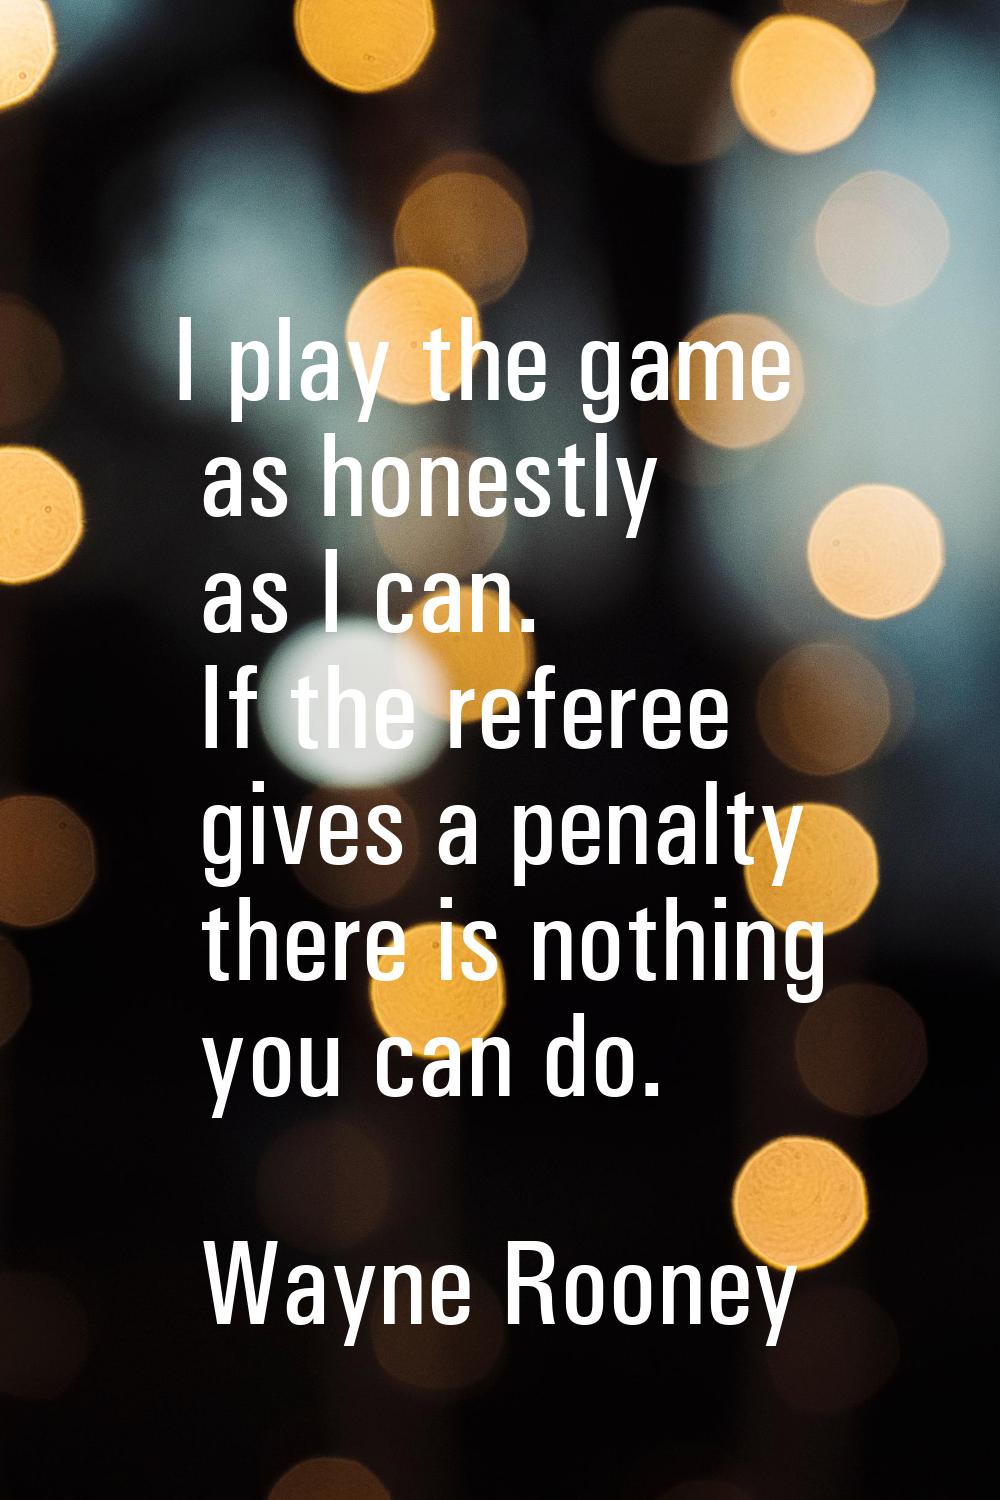 I play the game as honestly as I can. If the referee gives a penalty there is nothing you can do.